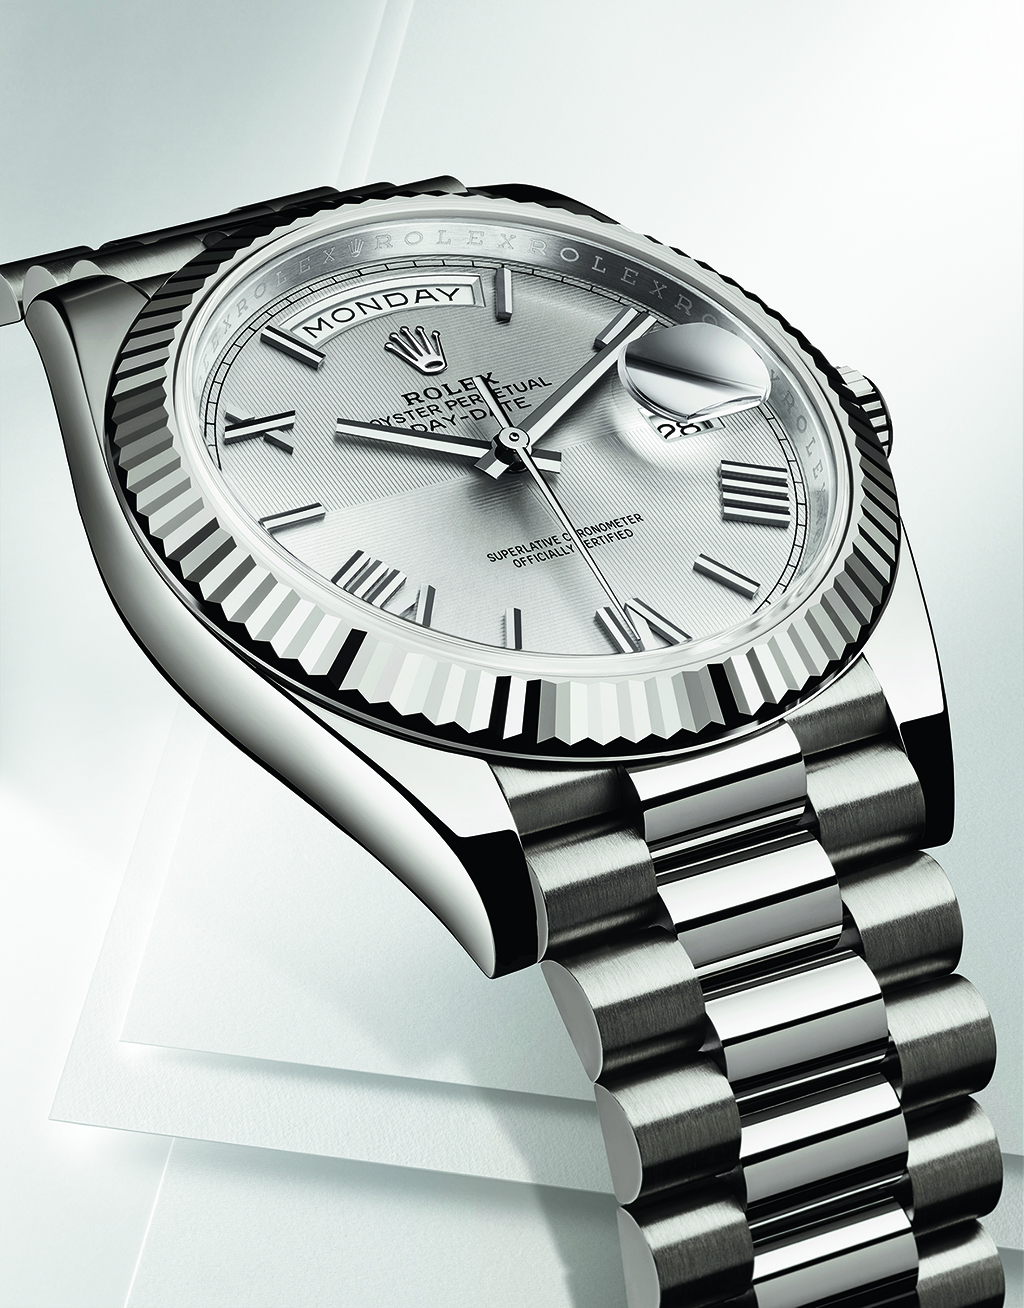 Rolex Oyster Perpetual Day-Date 40 in white gold and silver dial with a quadrant motif on sunray finish